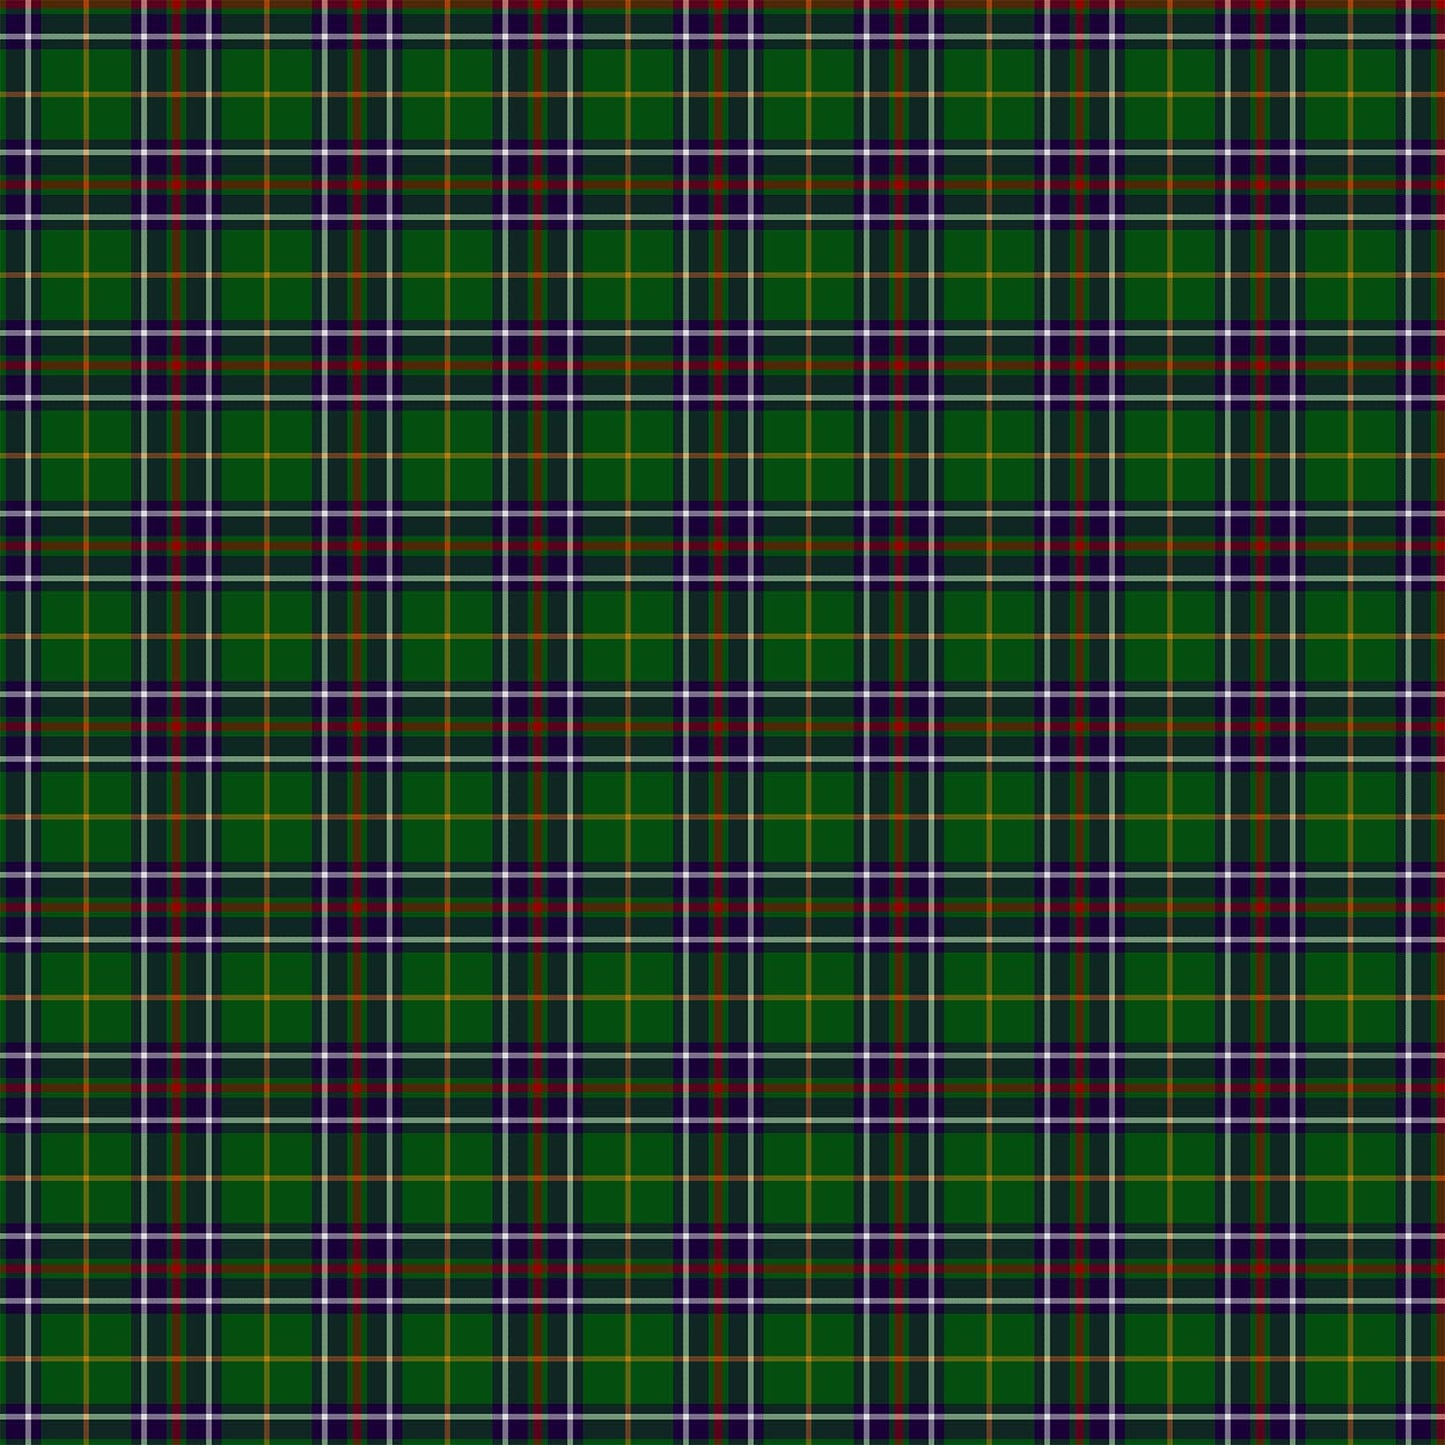 Tartan Traditions Newfoundland Green Multi W25582-76 by Northcott Fabrics (Sold in 25cm increments)